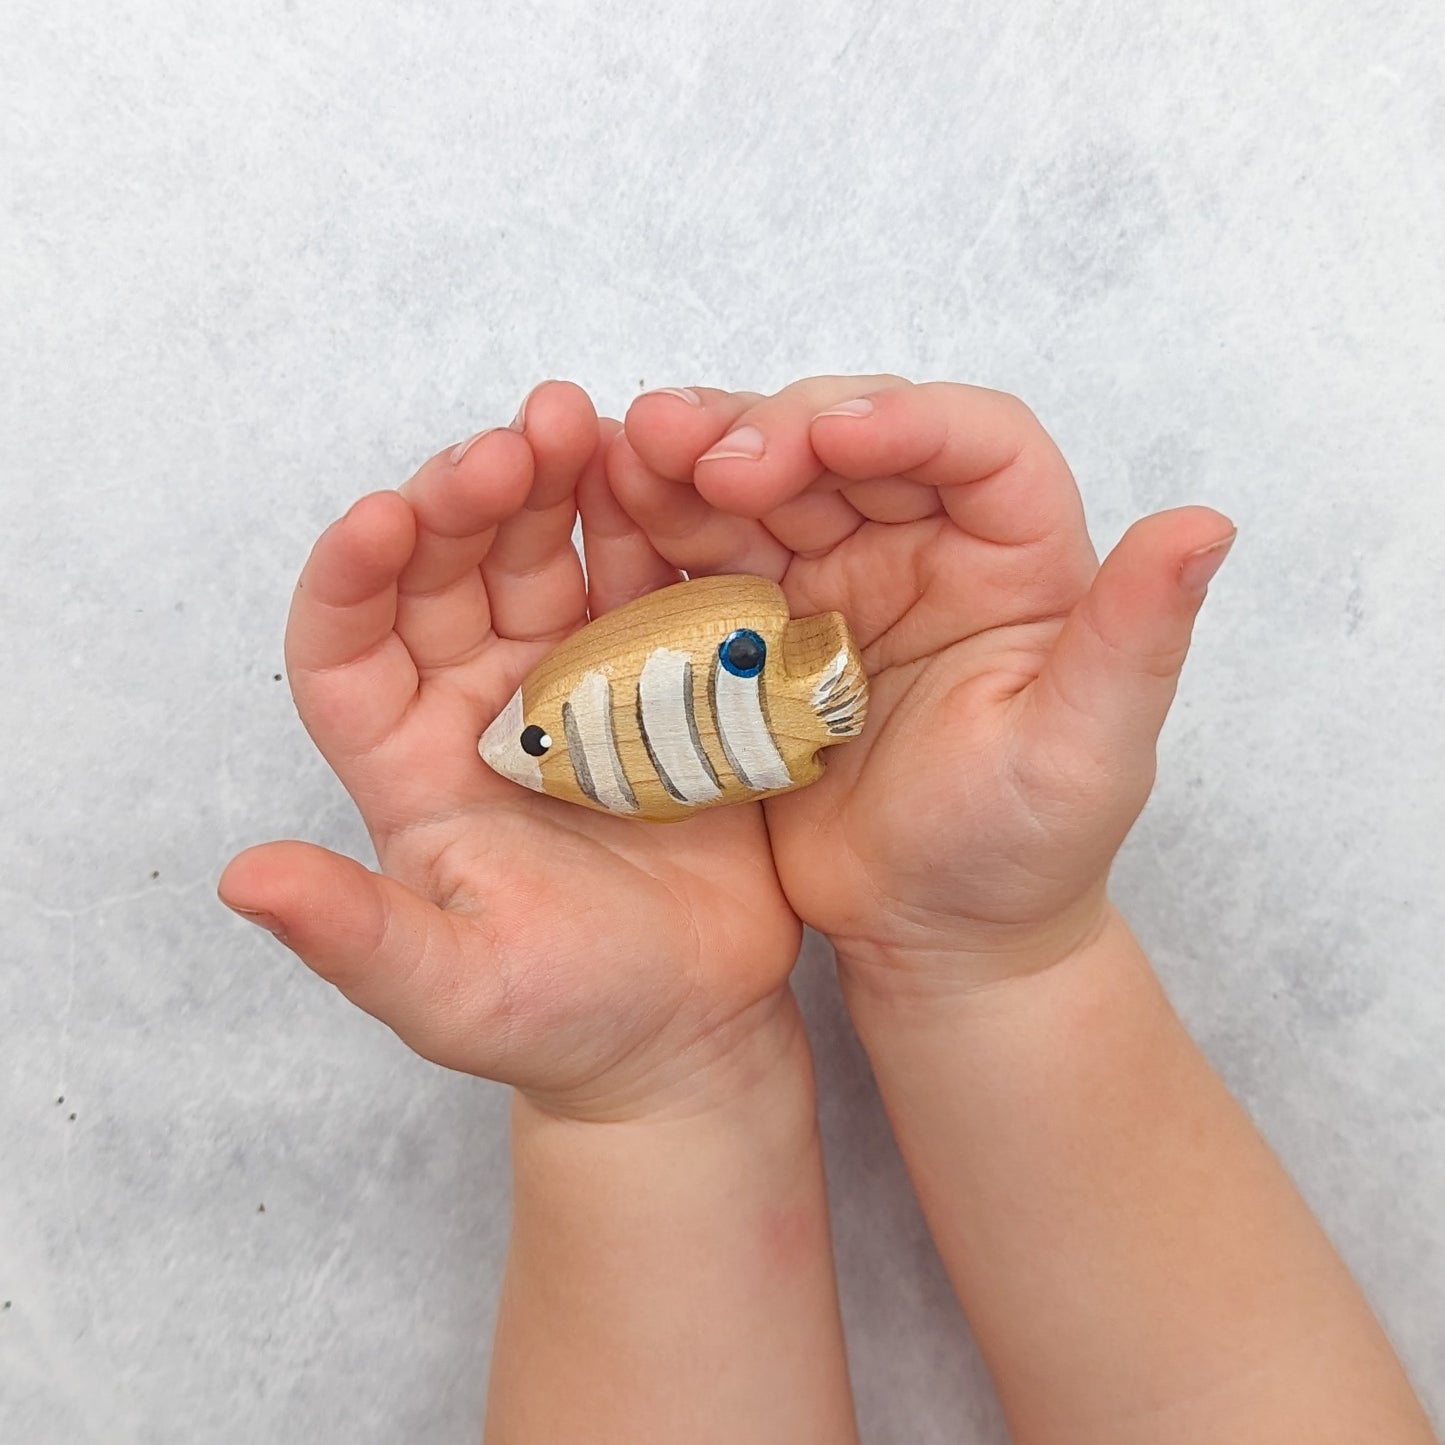 Butterfly Fish Wooden Toy